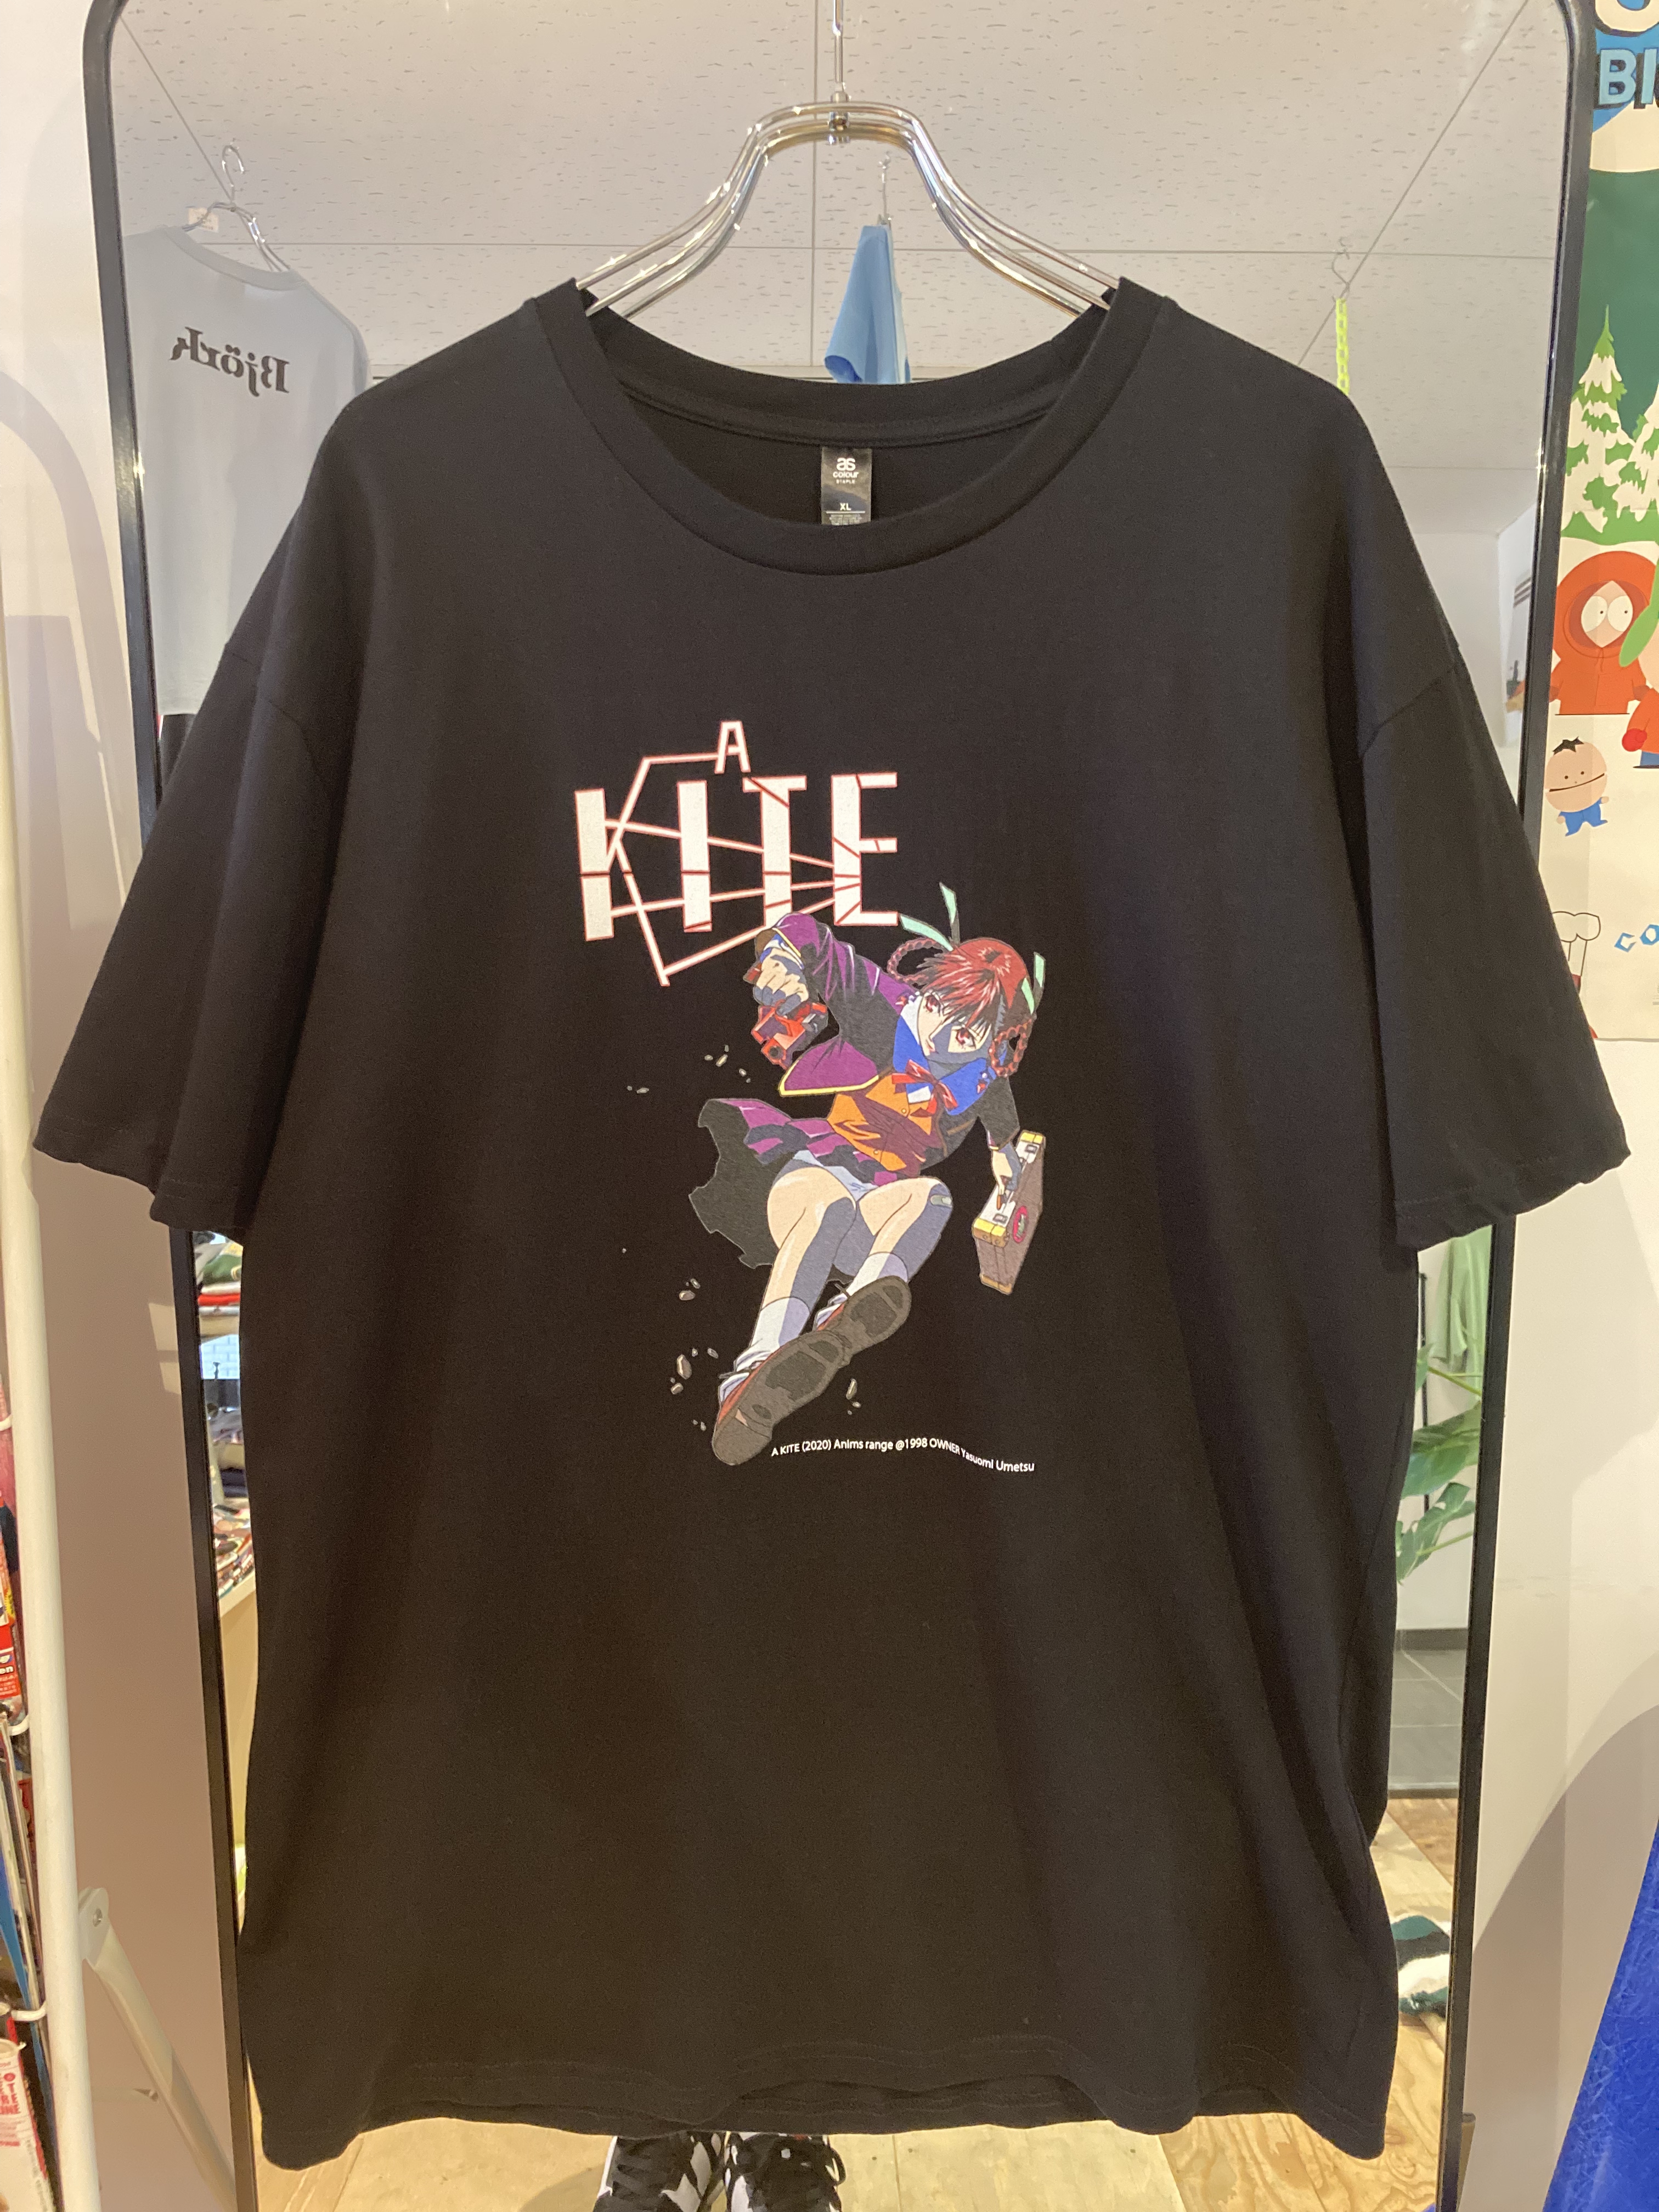 【SPECIAL】デッドストック 90s A KITE Tシャツ DVD